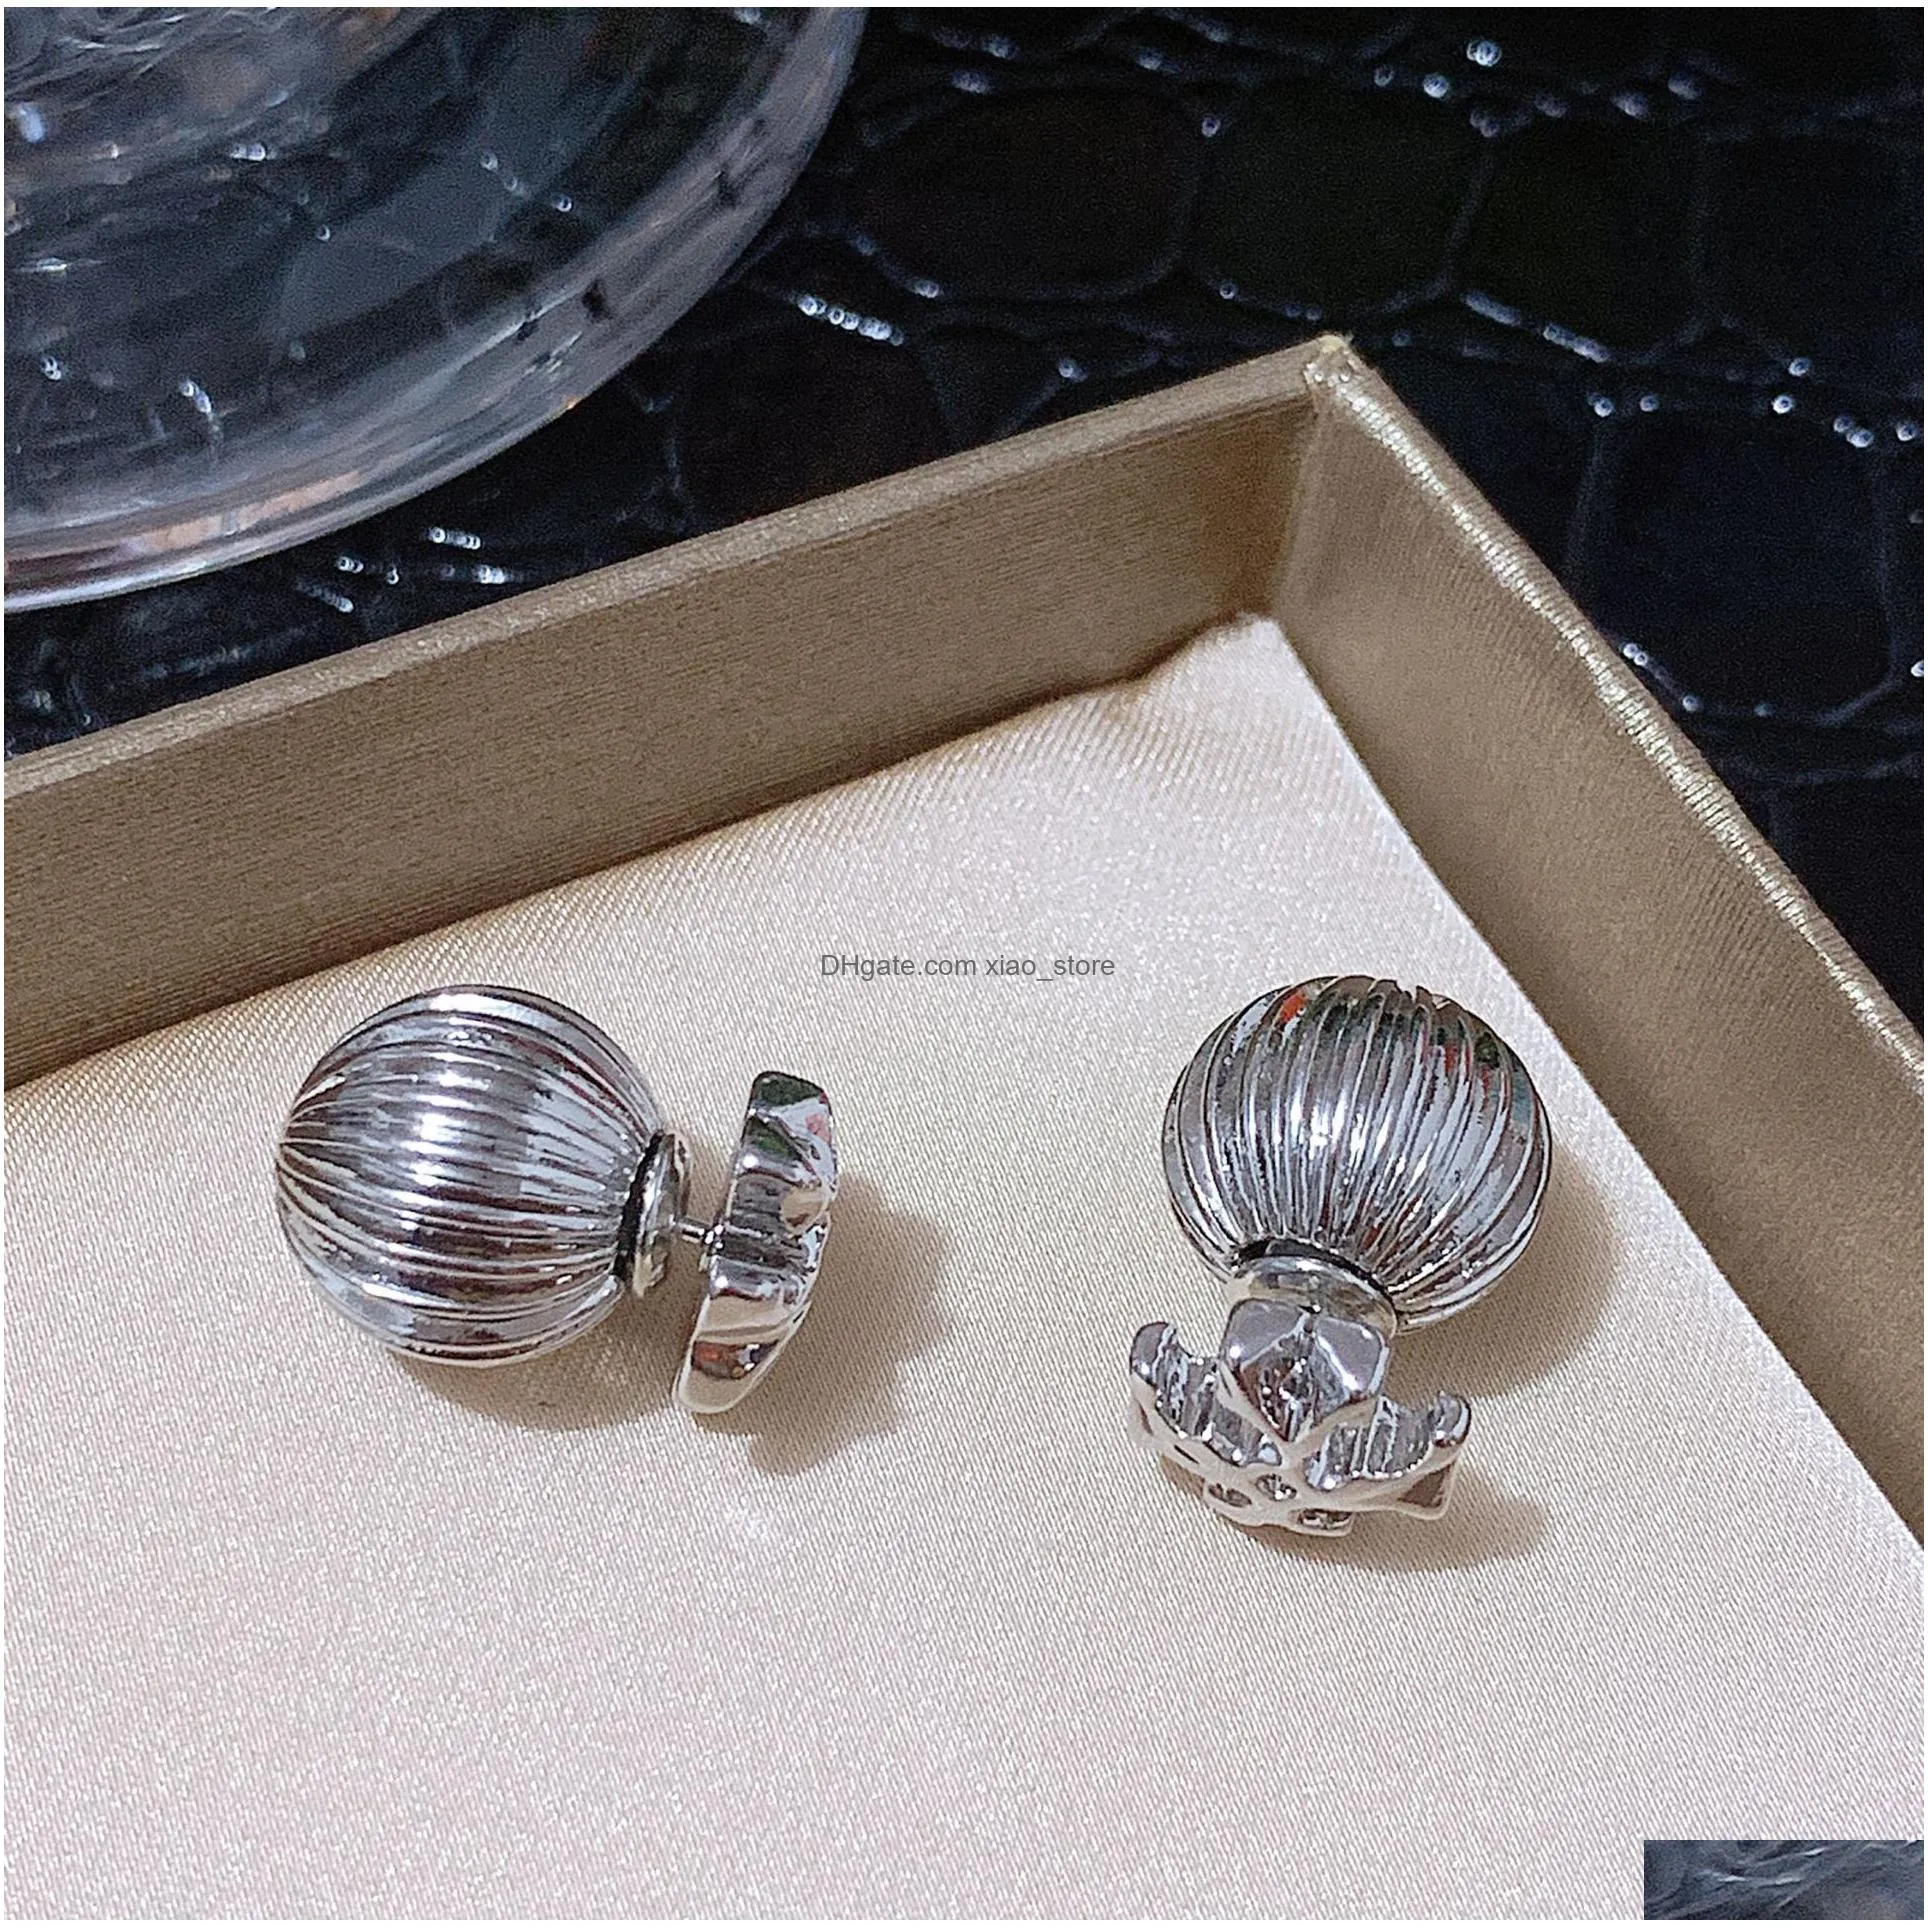 retro metal round ball ear stud earring with silver needle earrings worn in front and back hiphop rock punk jewelry